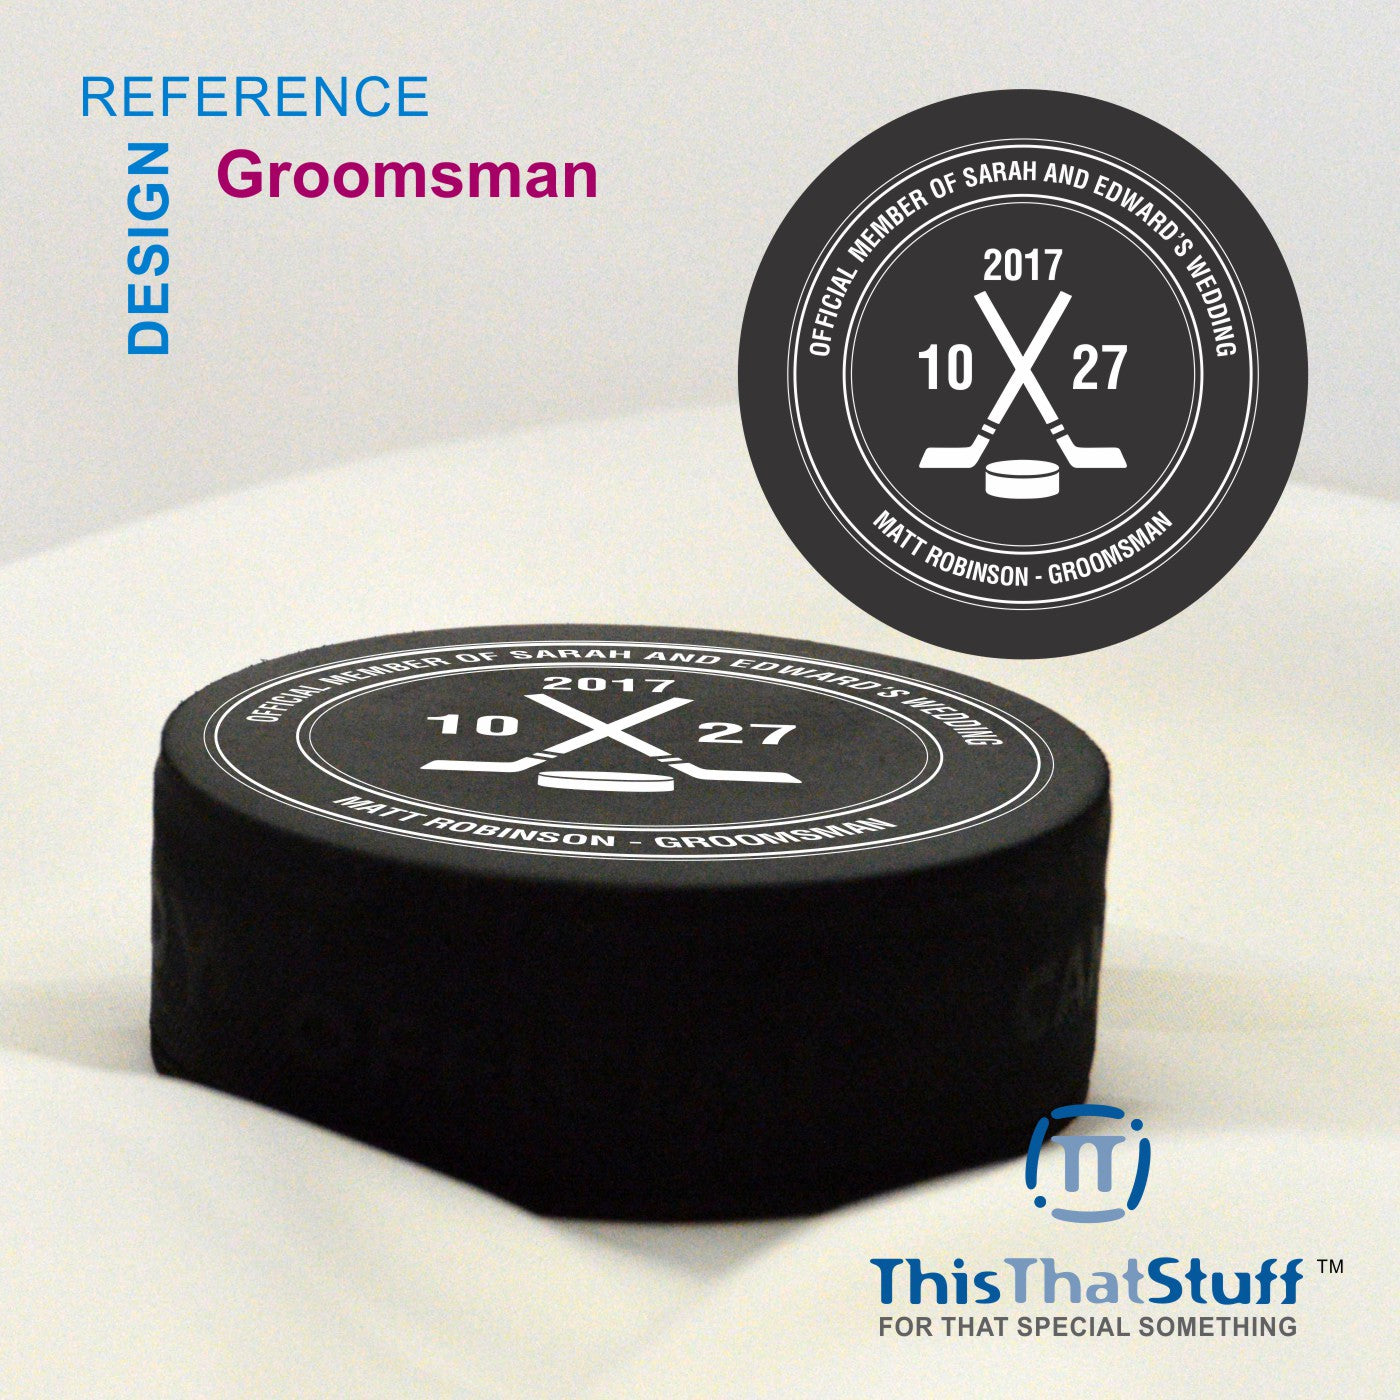 Official Wedding Members - Father of the Bride - Best Man - Groomsman - Ring Bearer - Hockey Puck